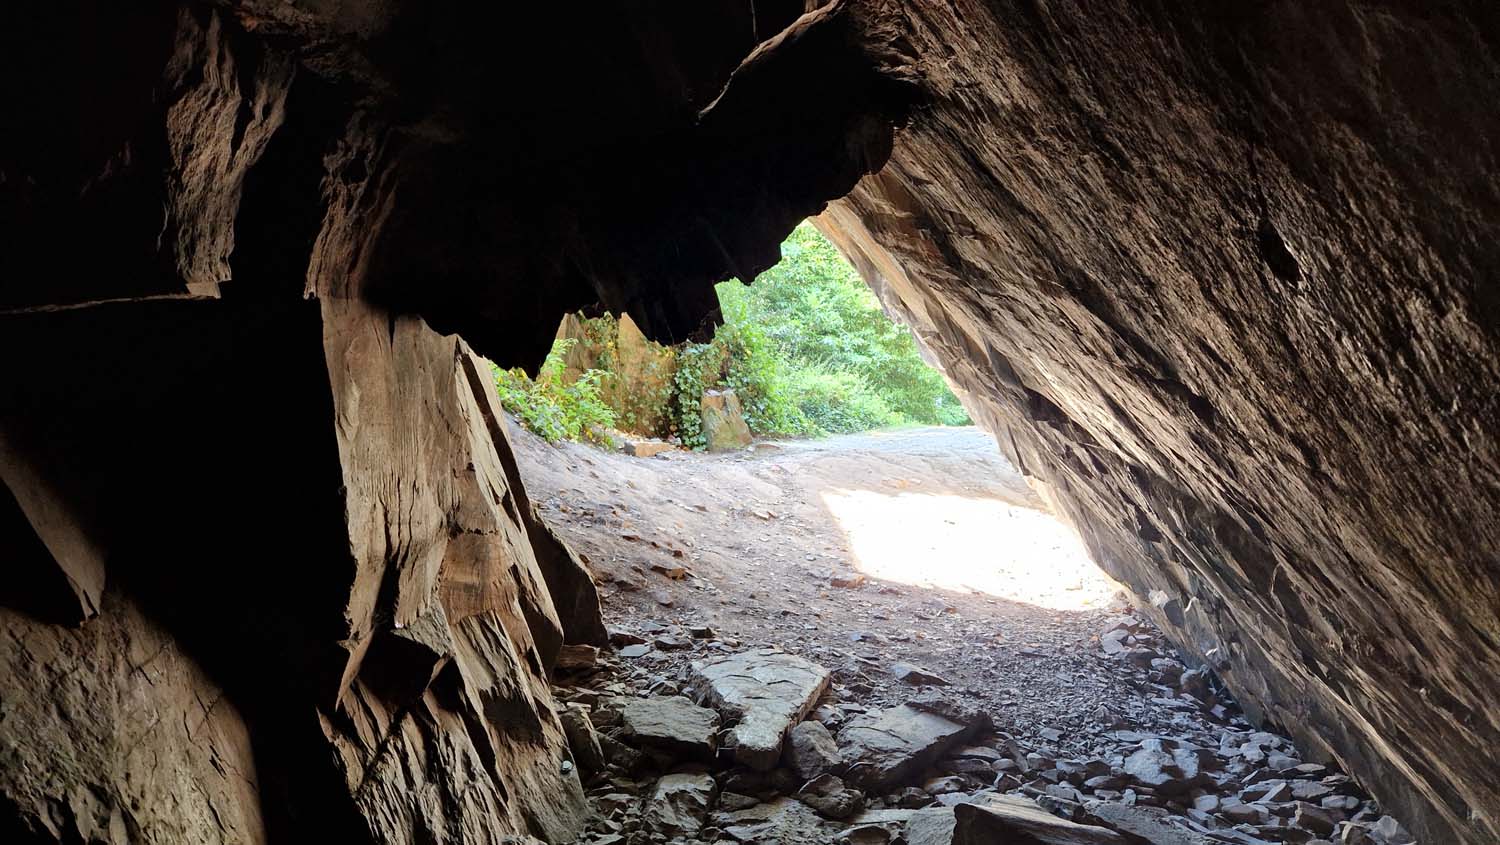 A view from inside the dark cave-like structure at Forest Rock, out into the sunshine